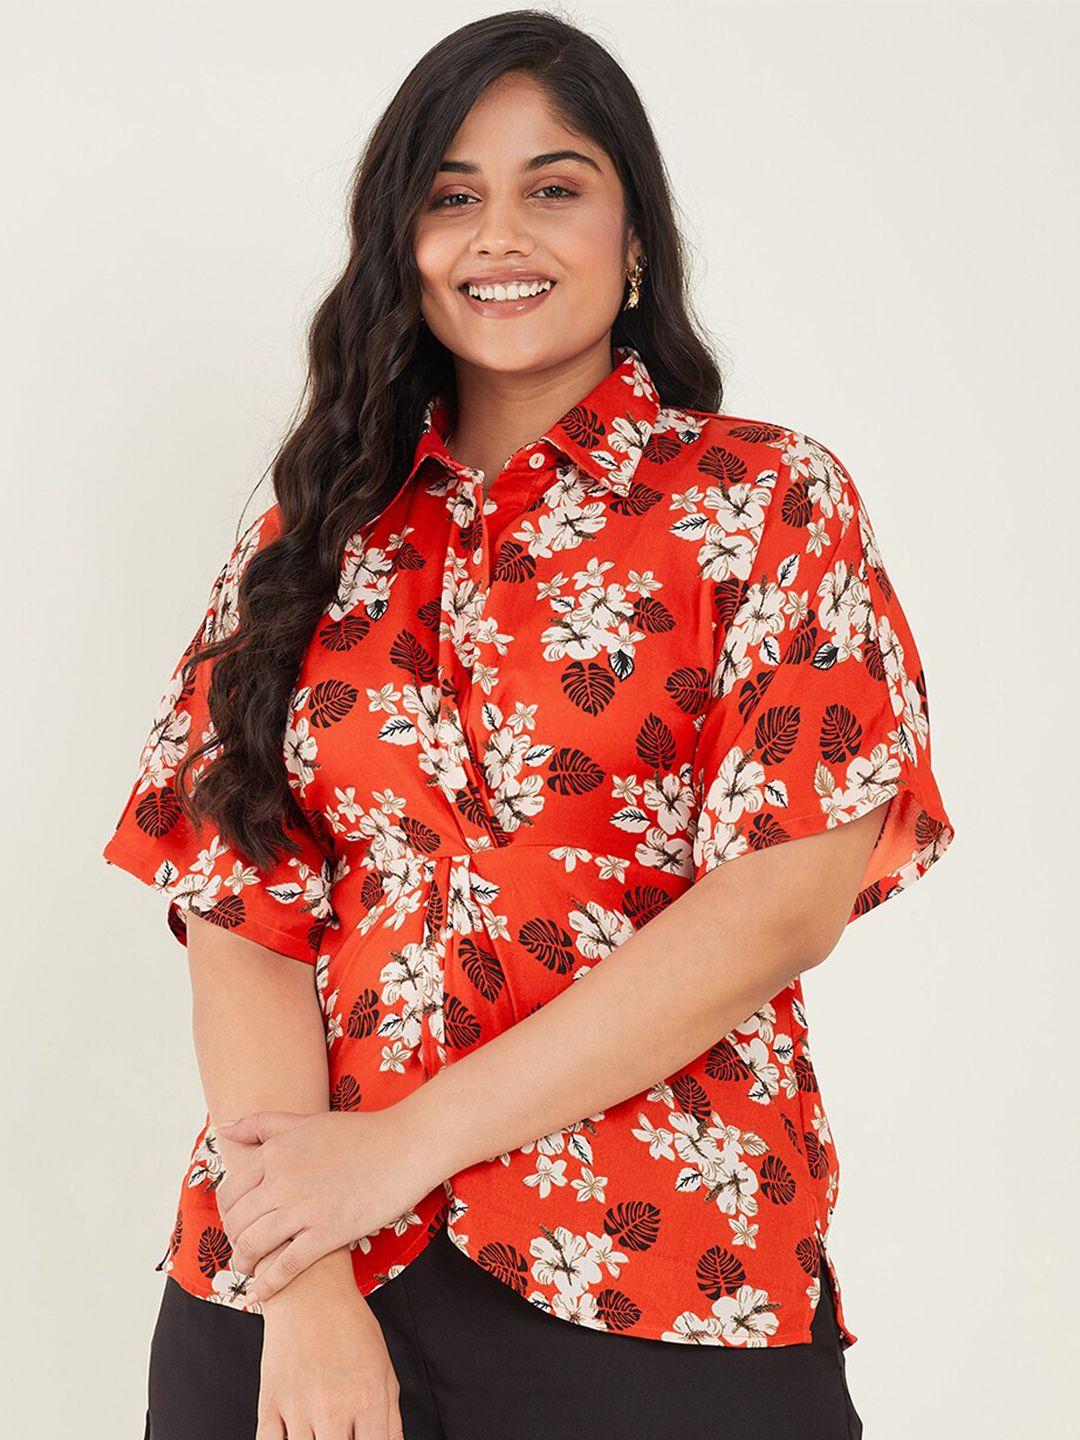 curve by kassually red plus size floral print extended sleeves shirt style top